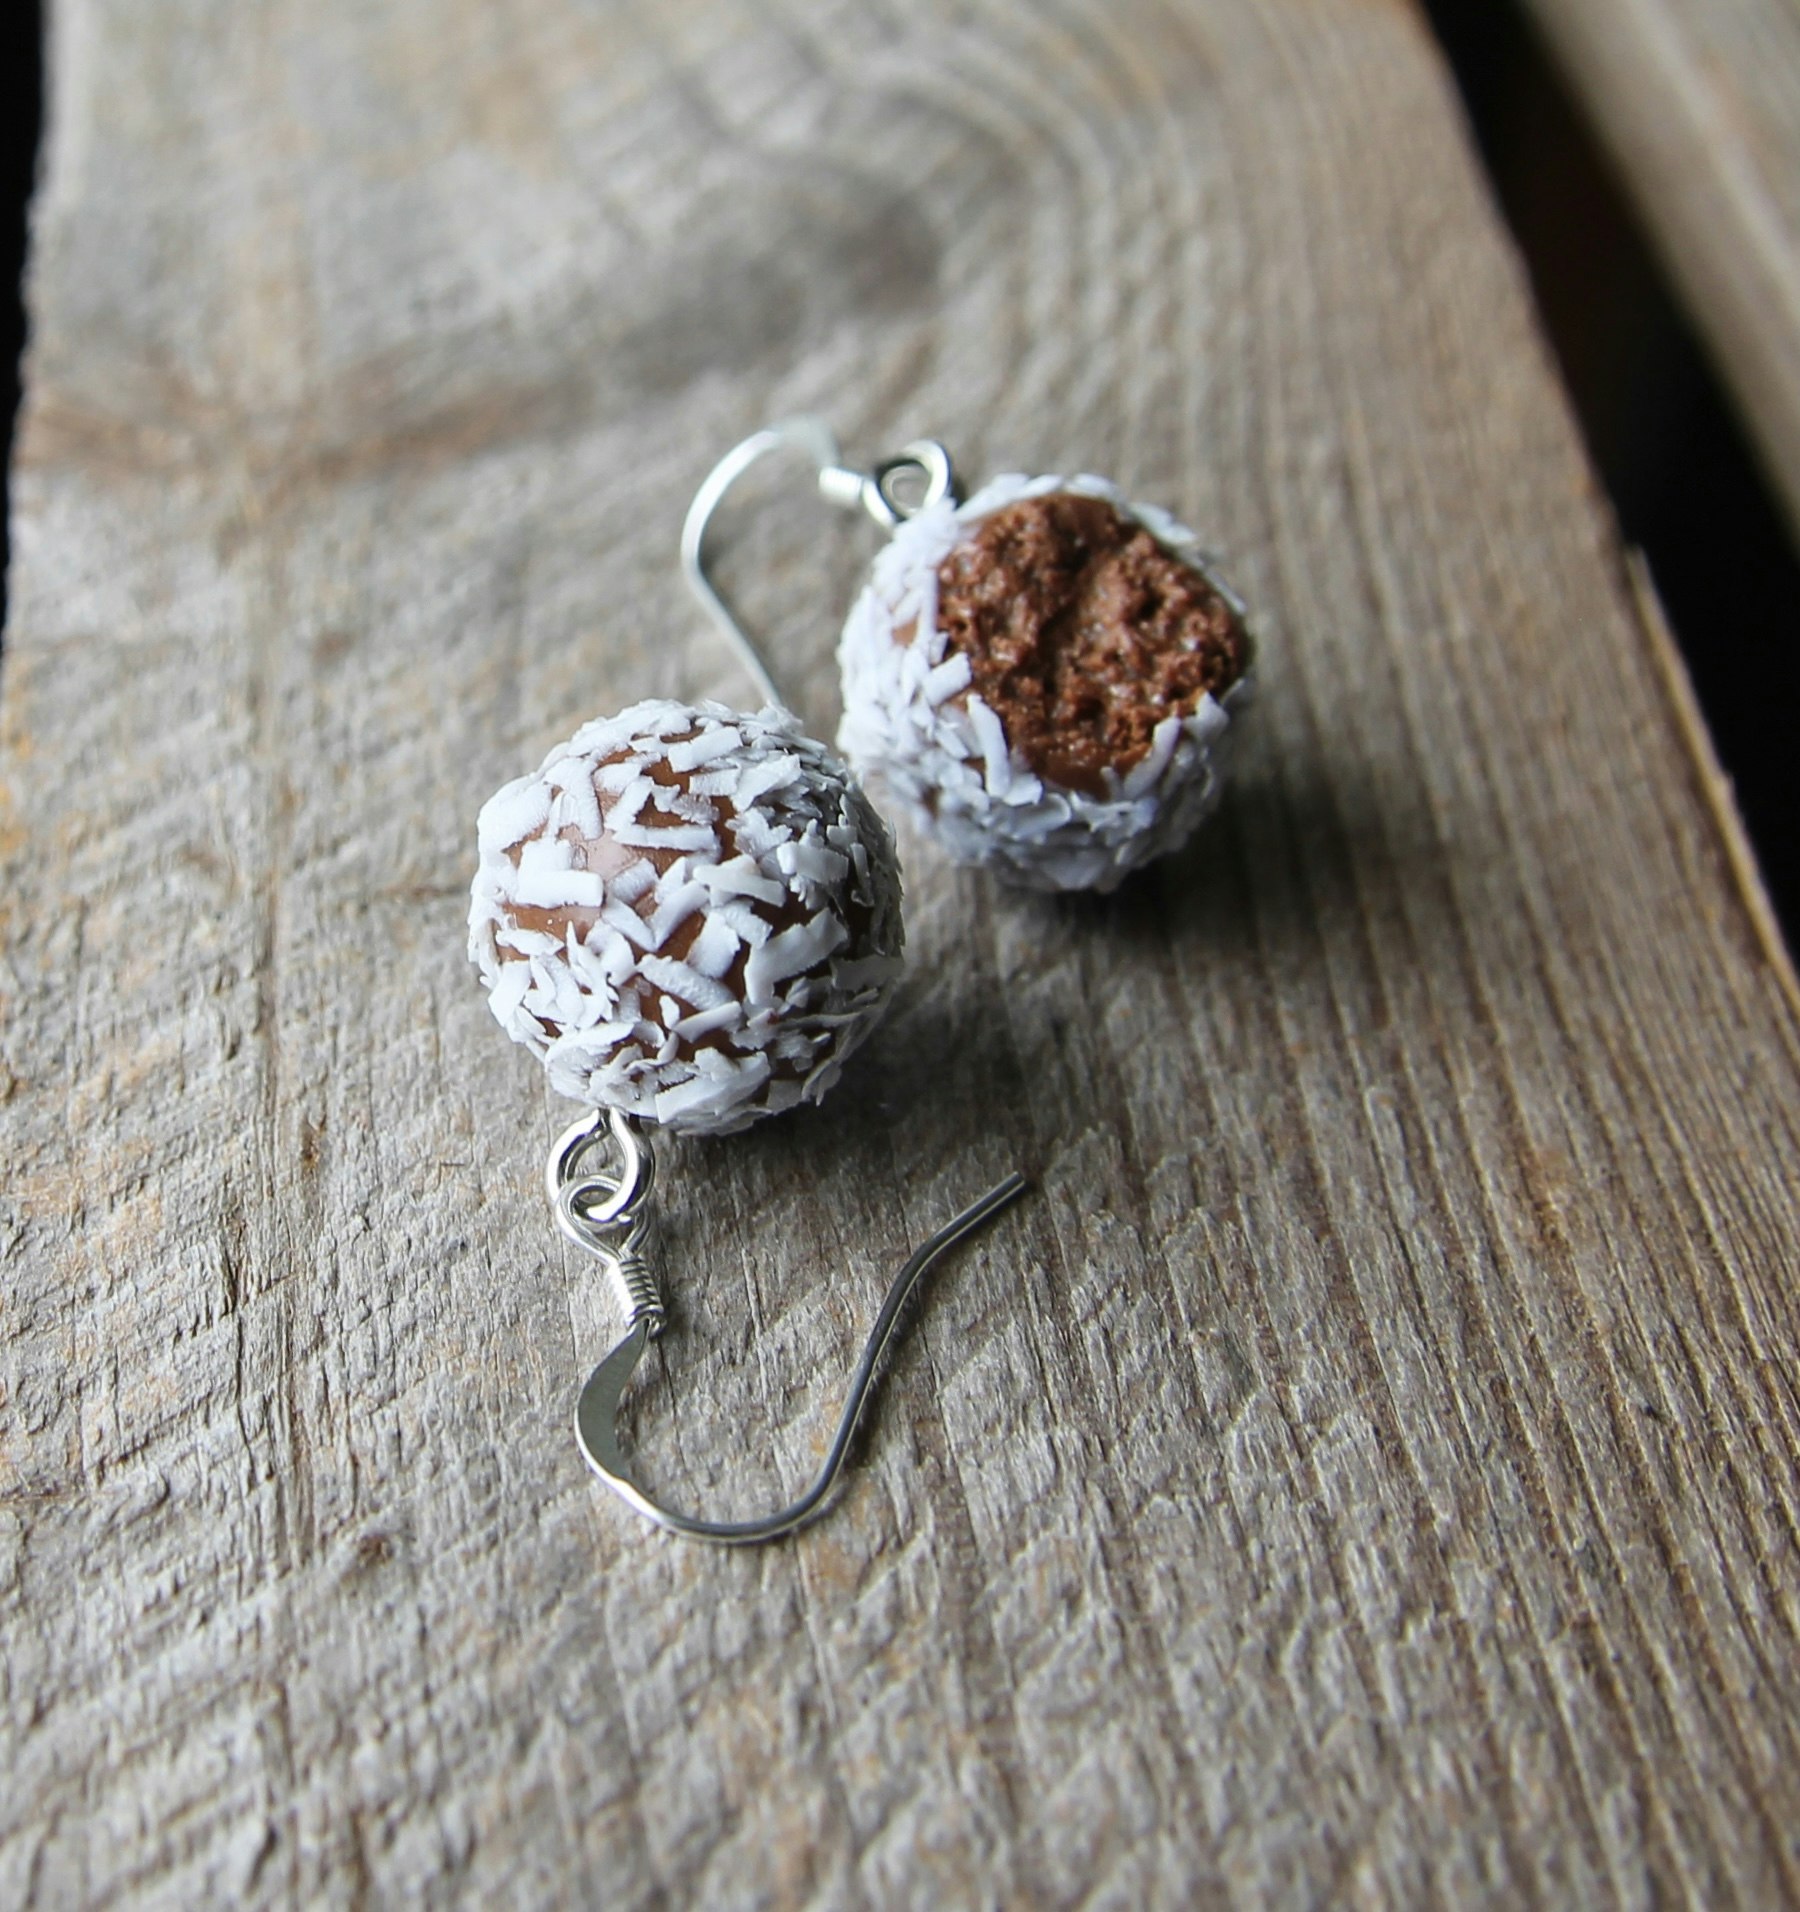 Earrings, chocolate balls with coconut